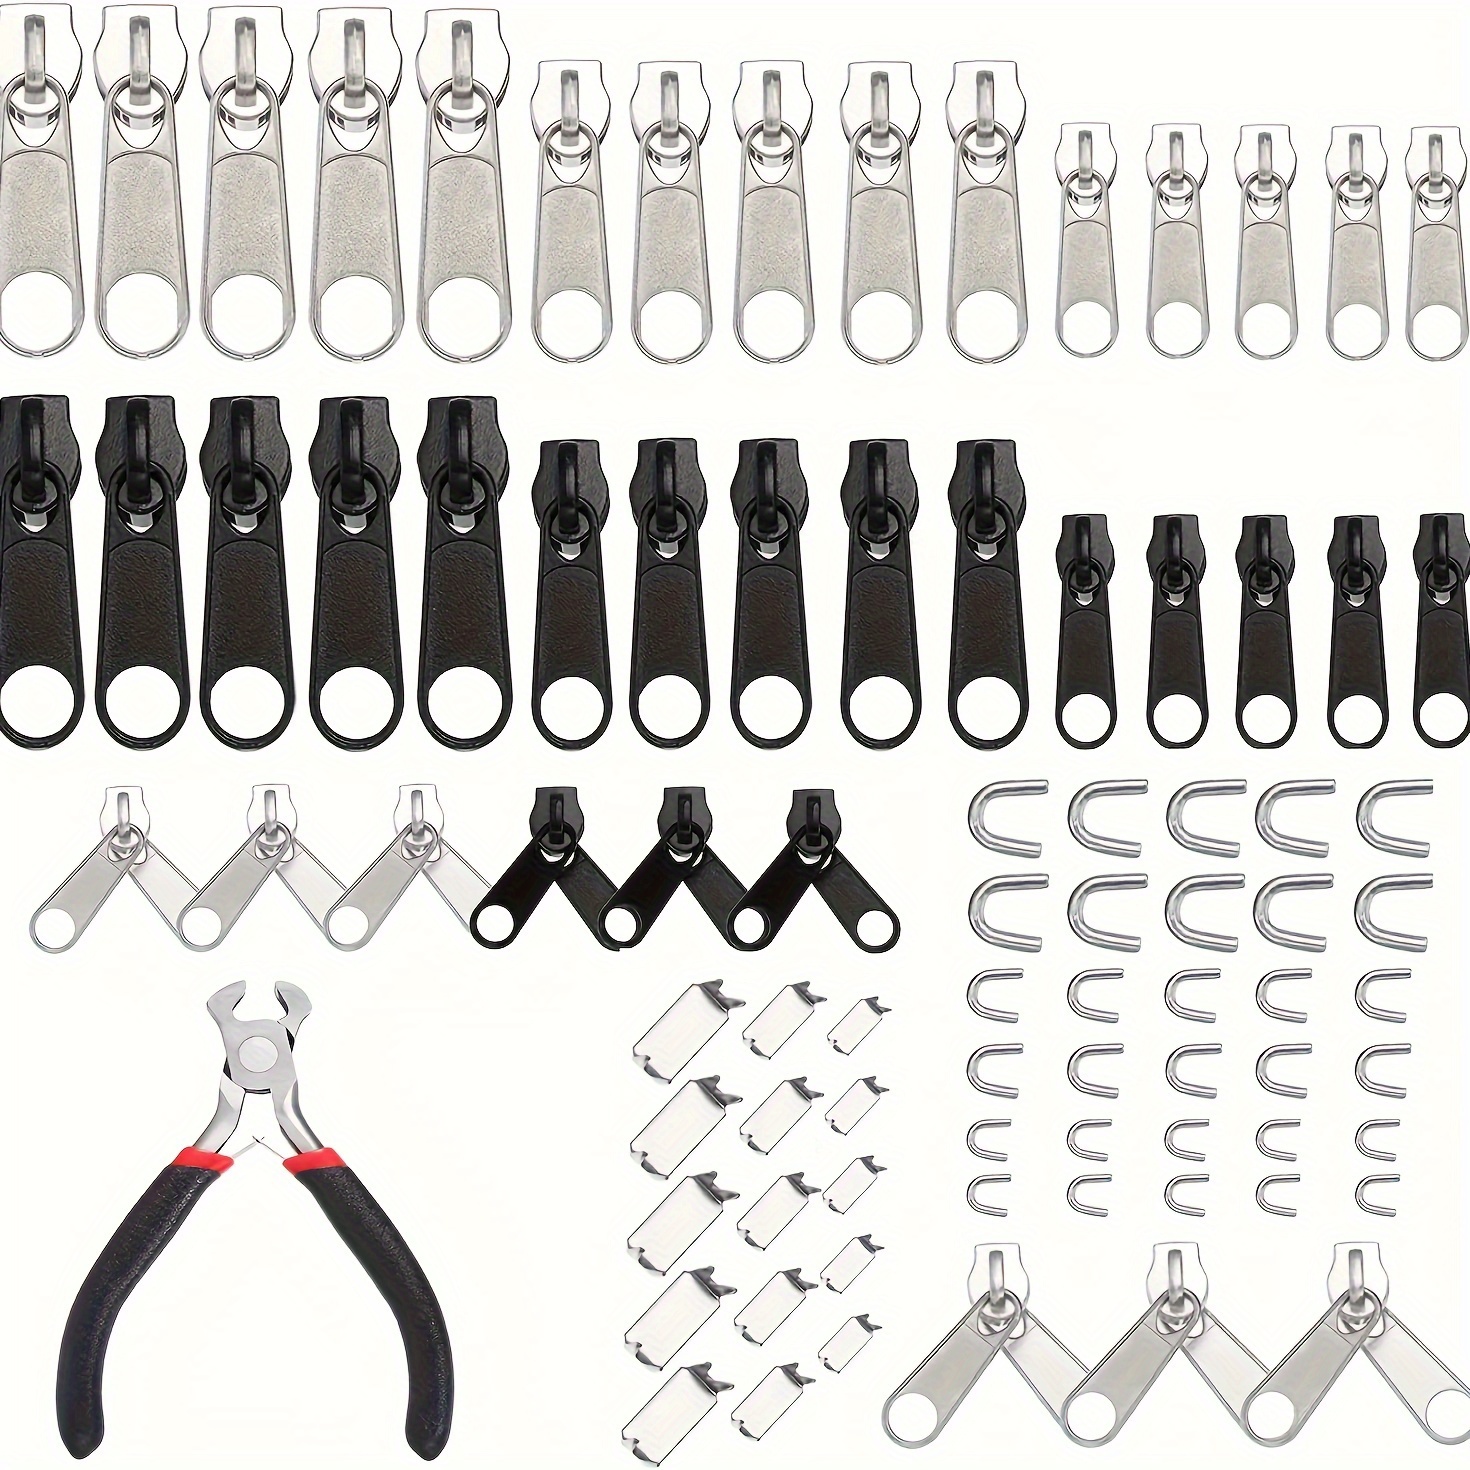 Zipper Repair Kit 5 Sliders with Pull 12 Pcs Zipper Stops Replacement Zipper  Head Bottom Stop and Top Stop Fix Zipper On for Repairing Coats Jackets  Metal Plastic and Nylon Coil Zippers.